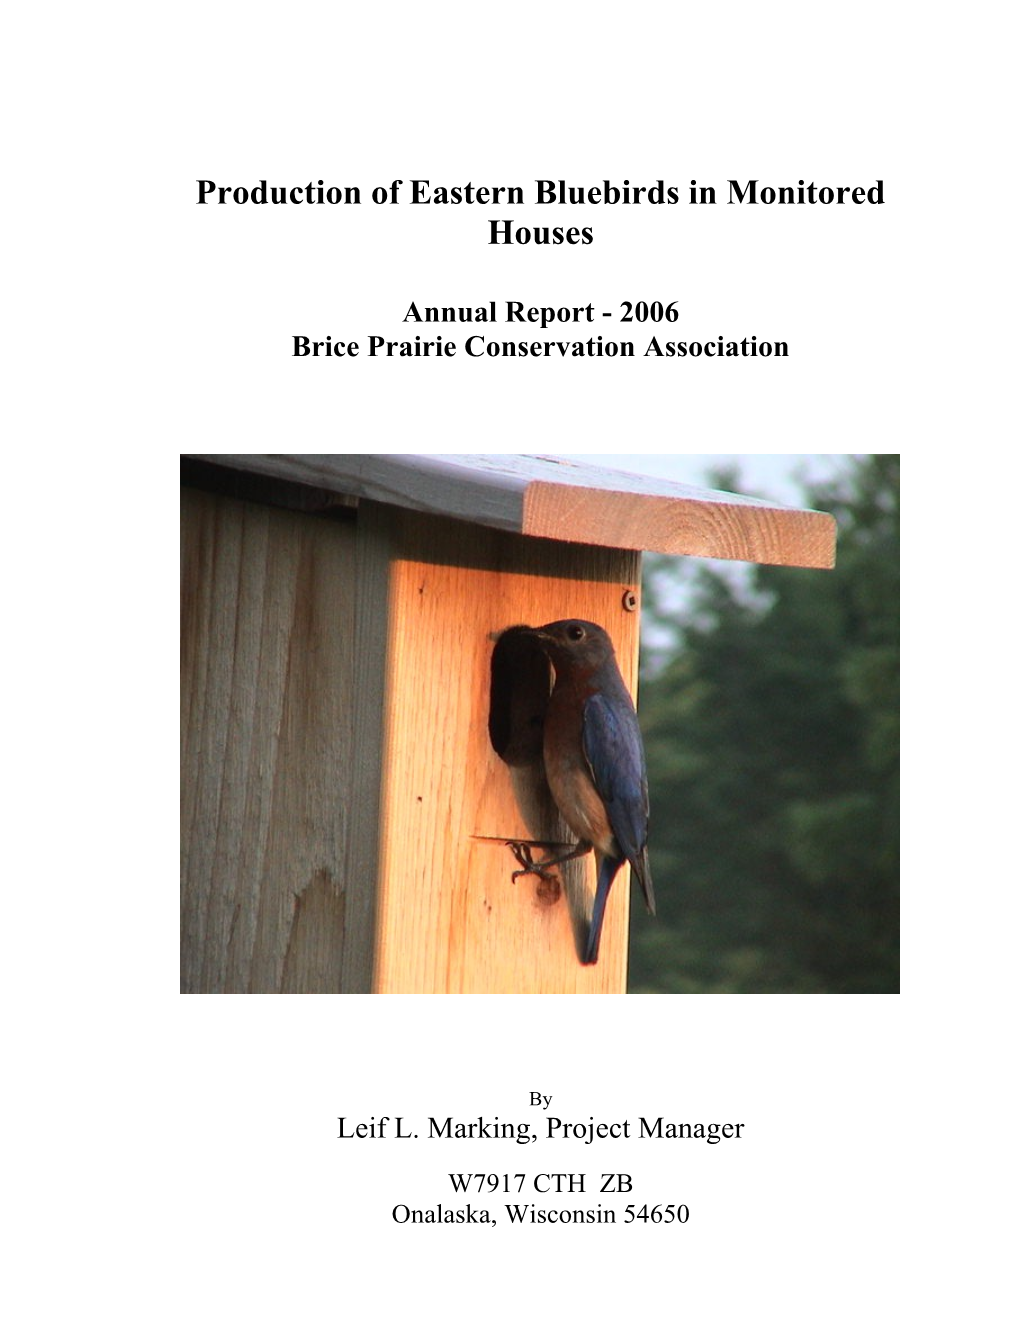 Production of Bluebirds in Monitored Houses